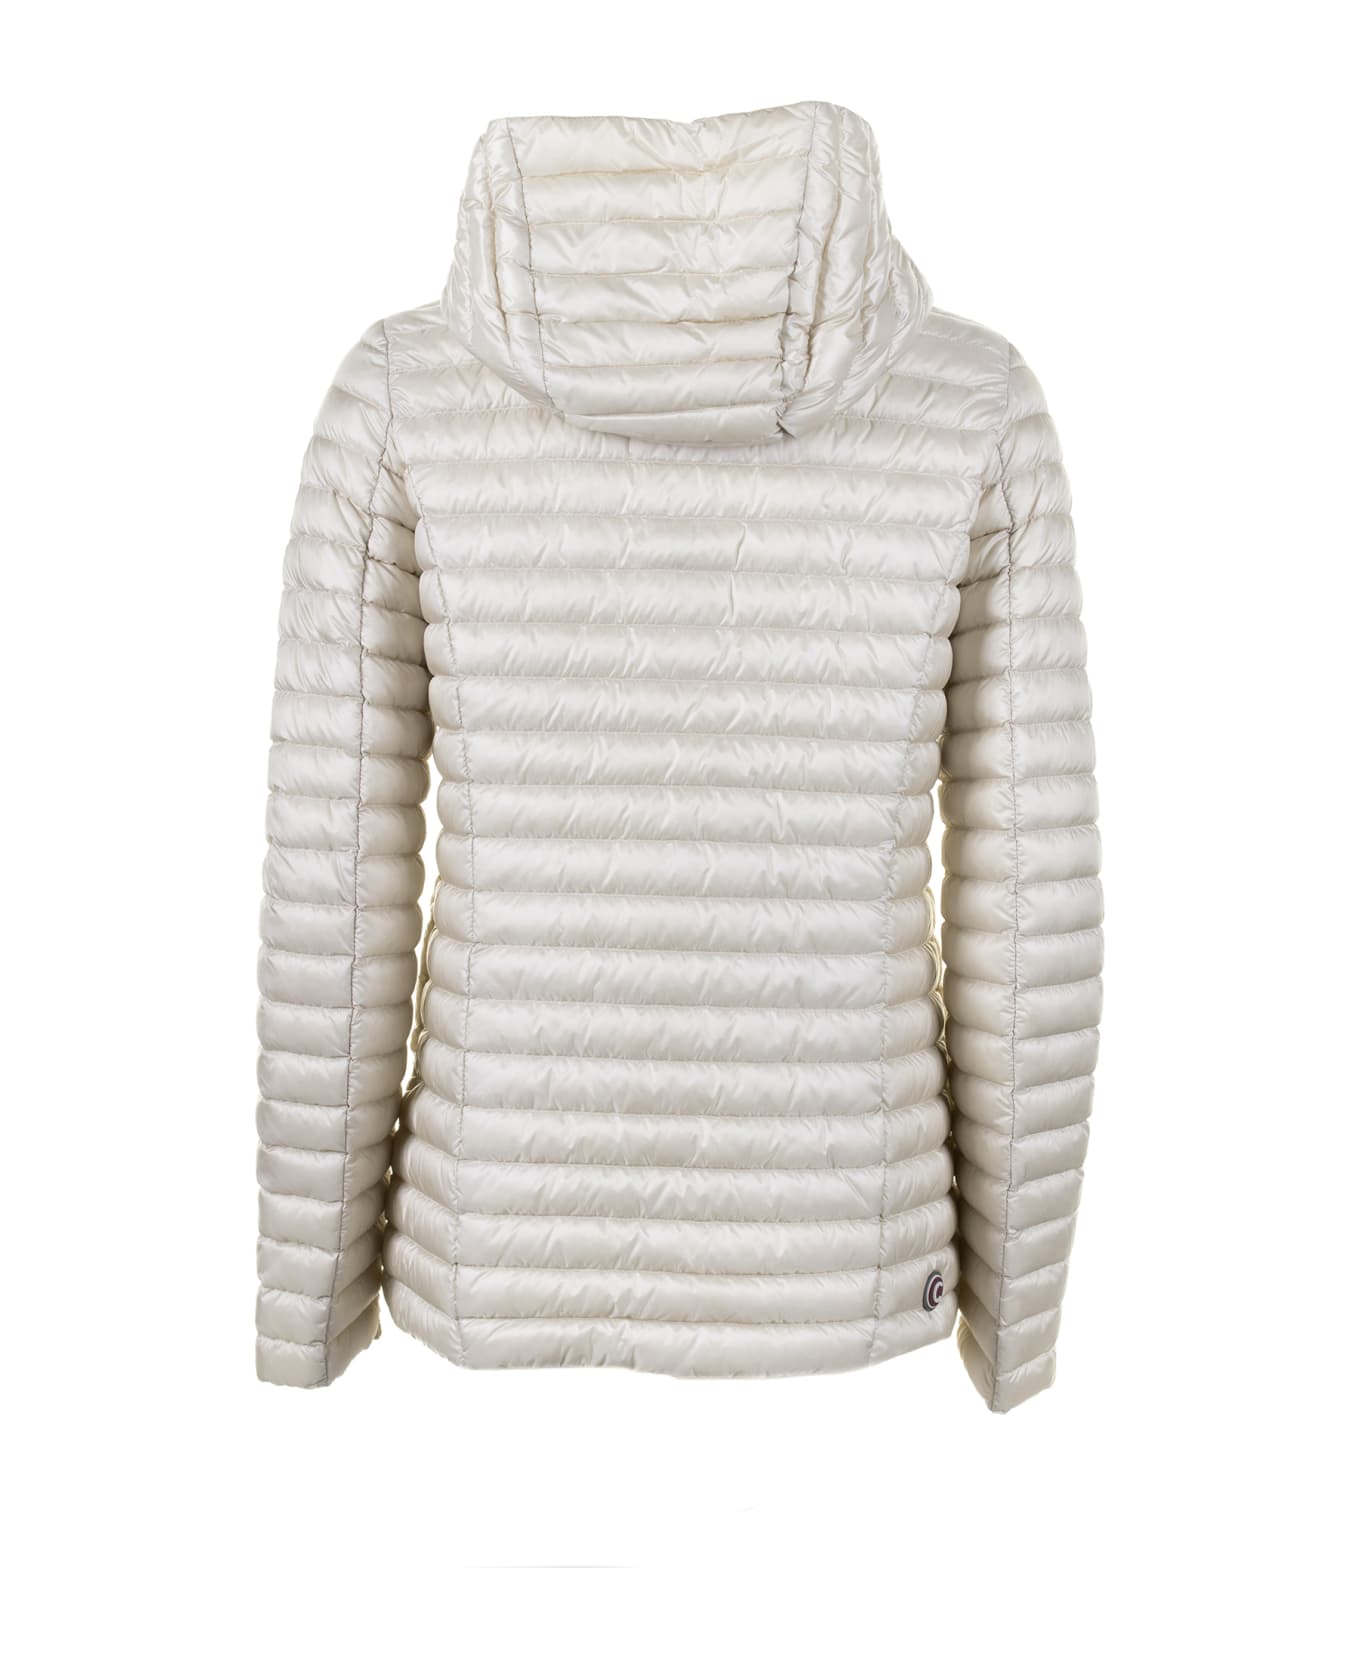 Colmar White Down Jacket With Hood - PORCELLANA